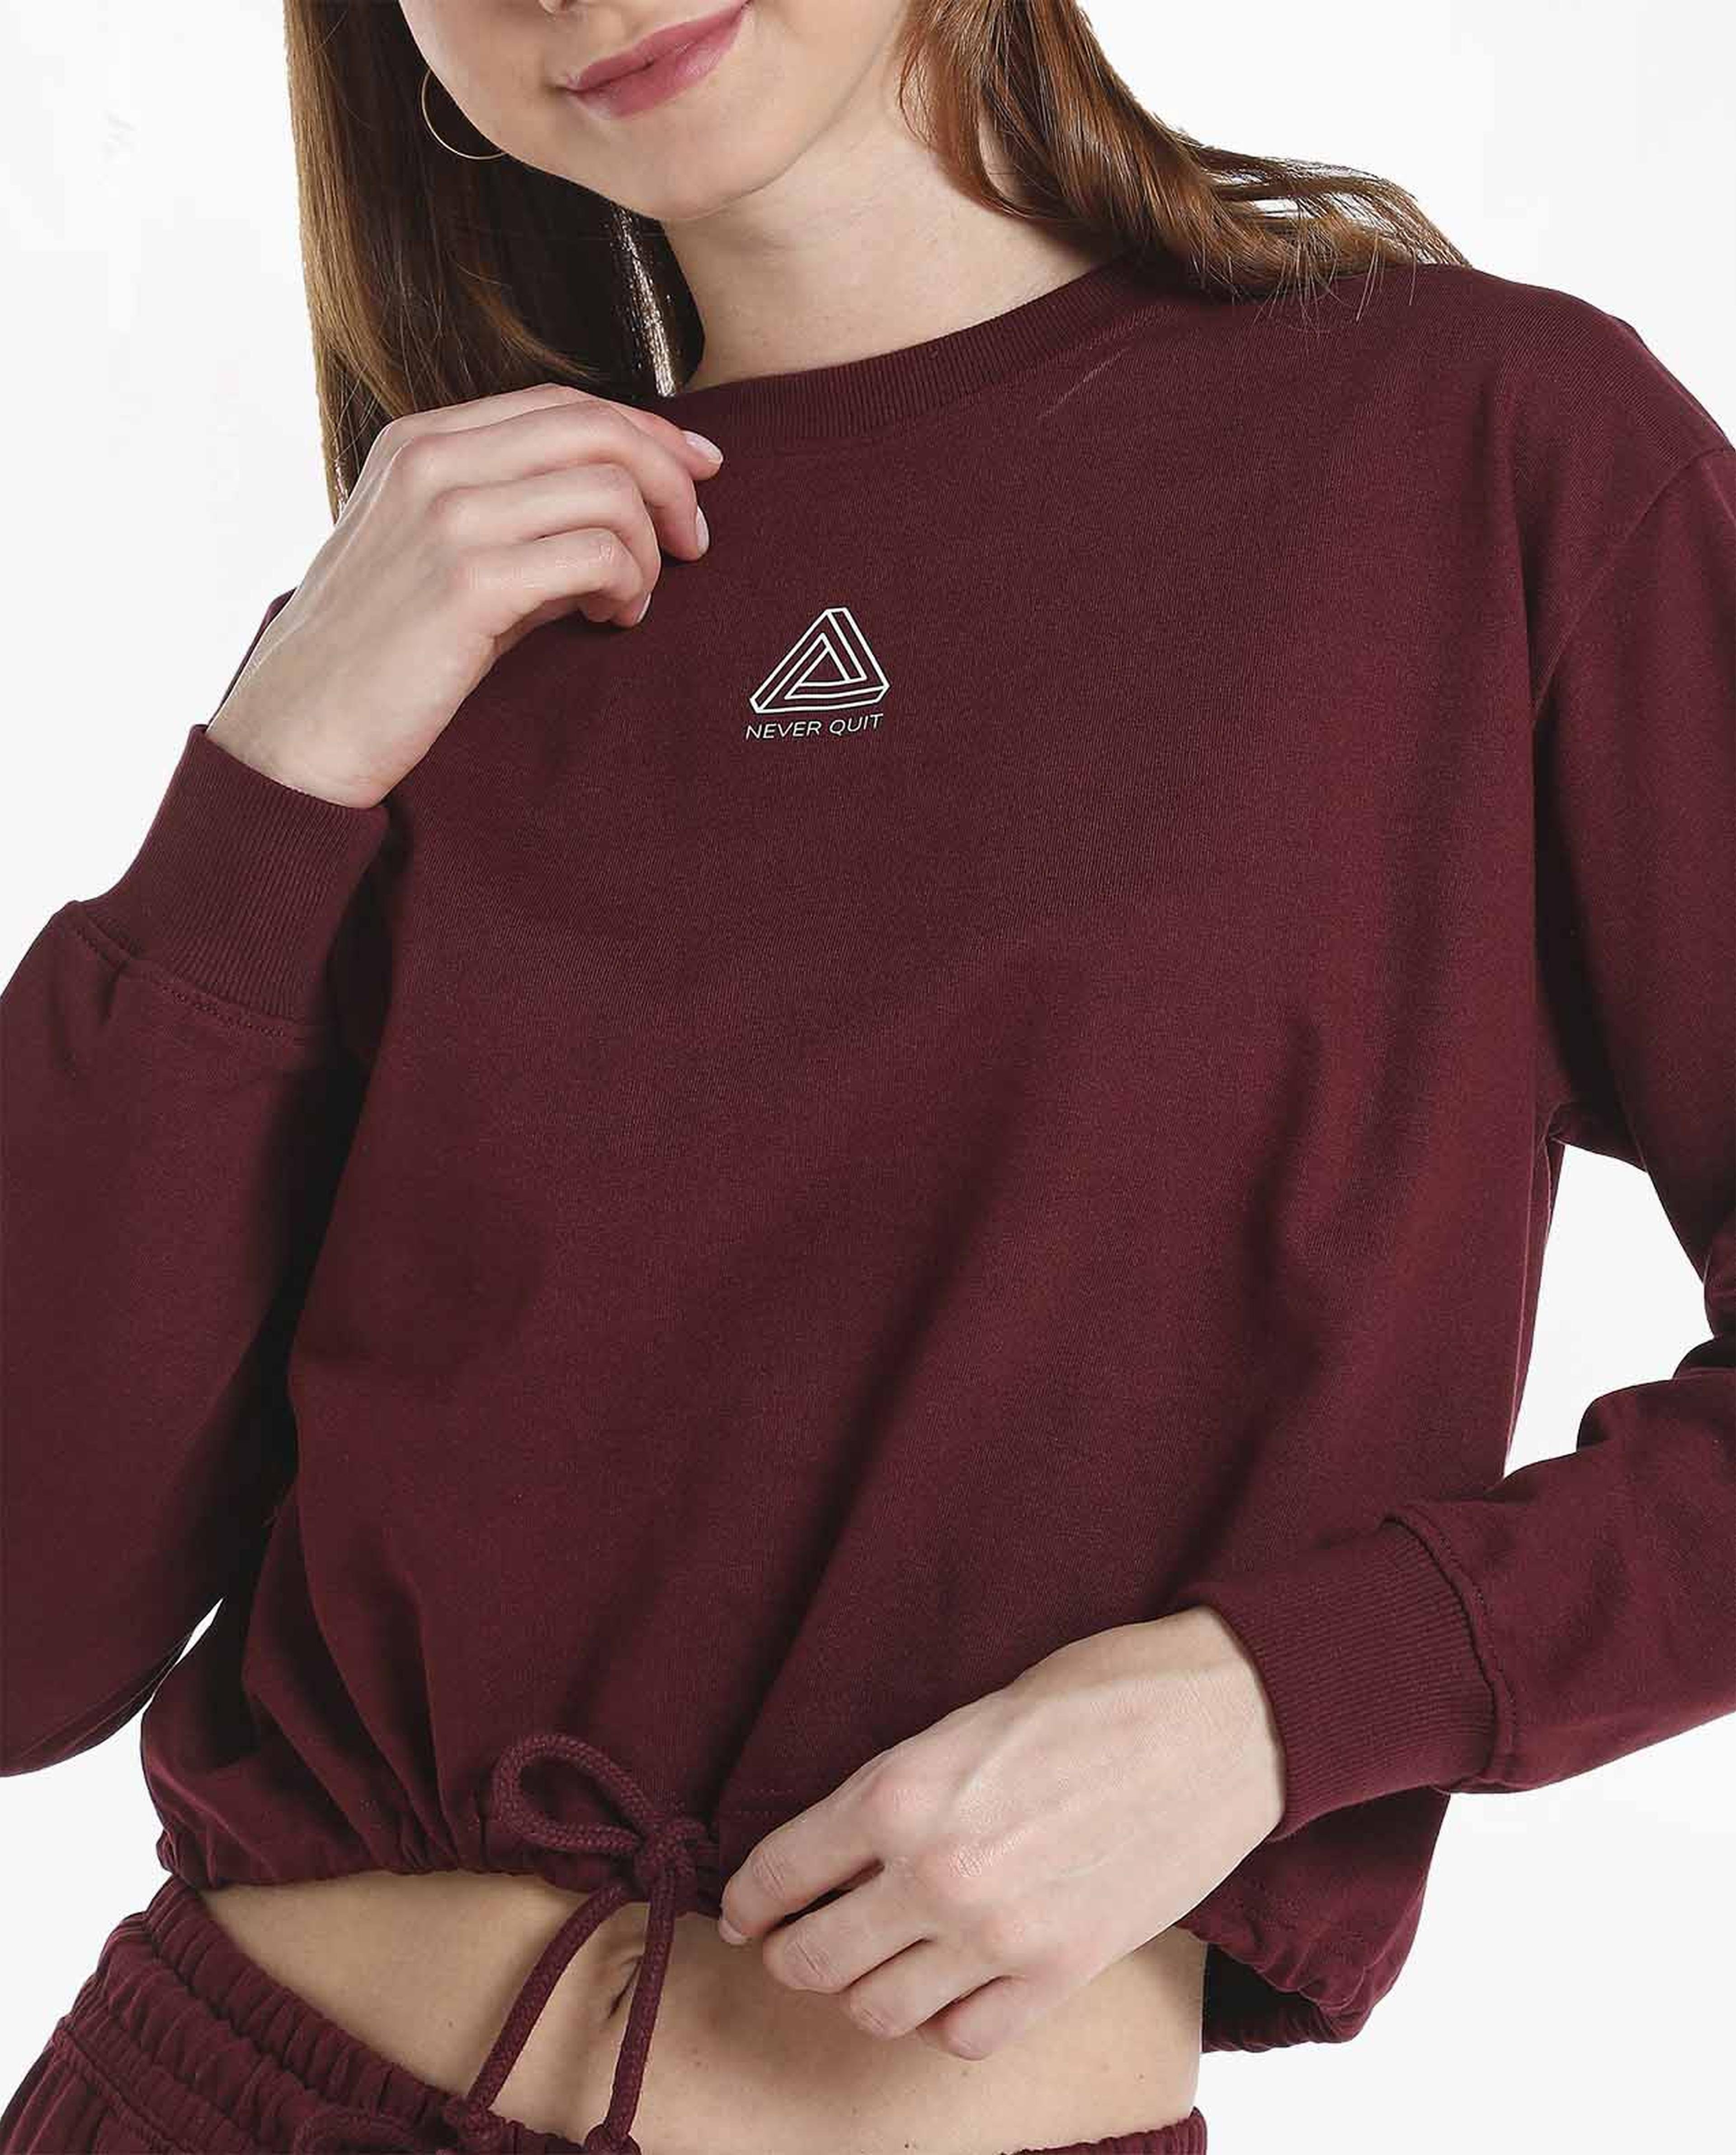 Solid Drawstring Waist Sweatshirt With Long Sleeves And Crew Neck